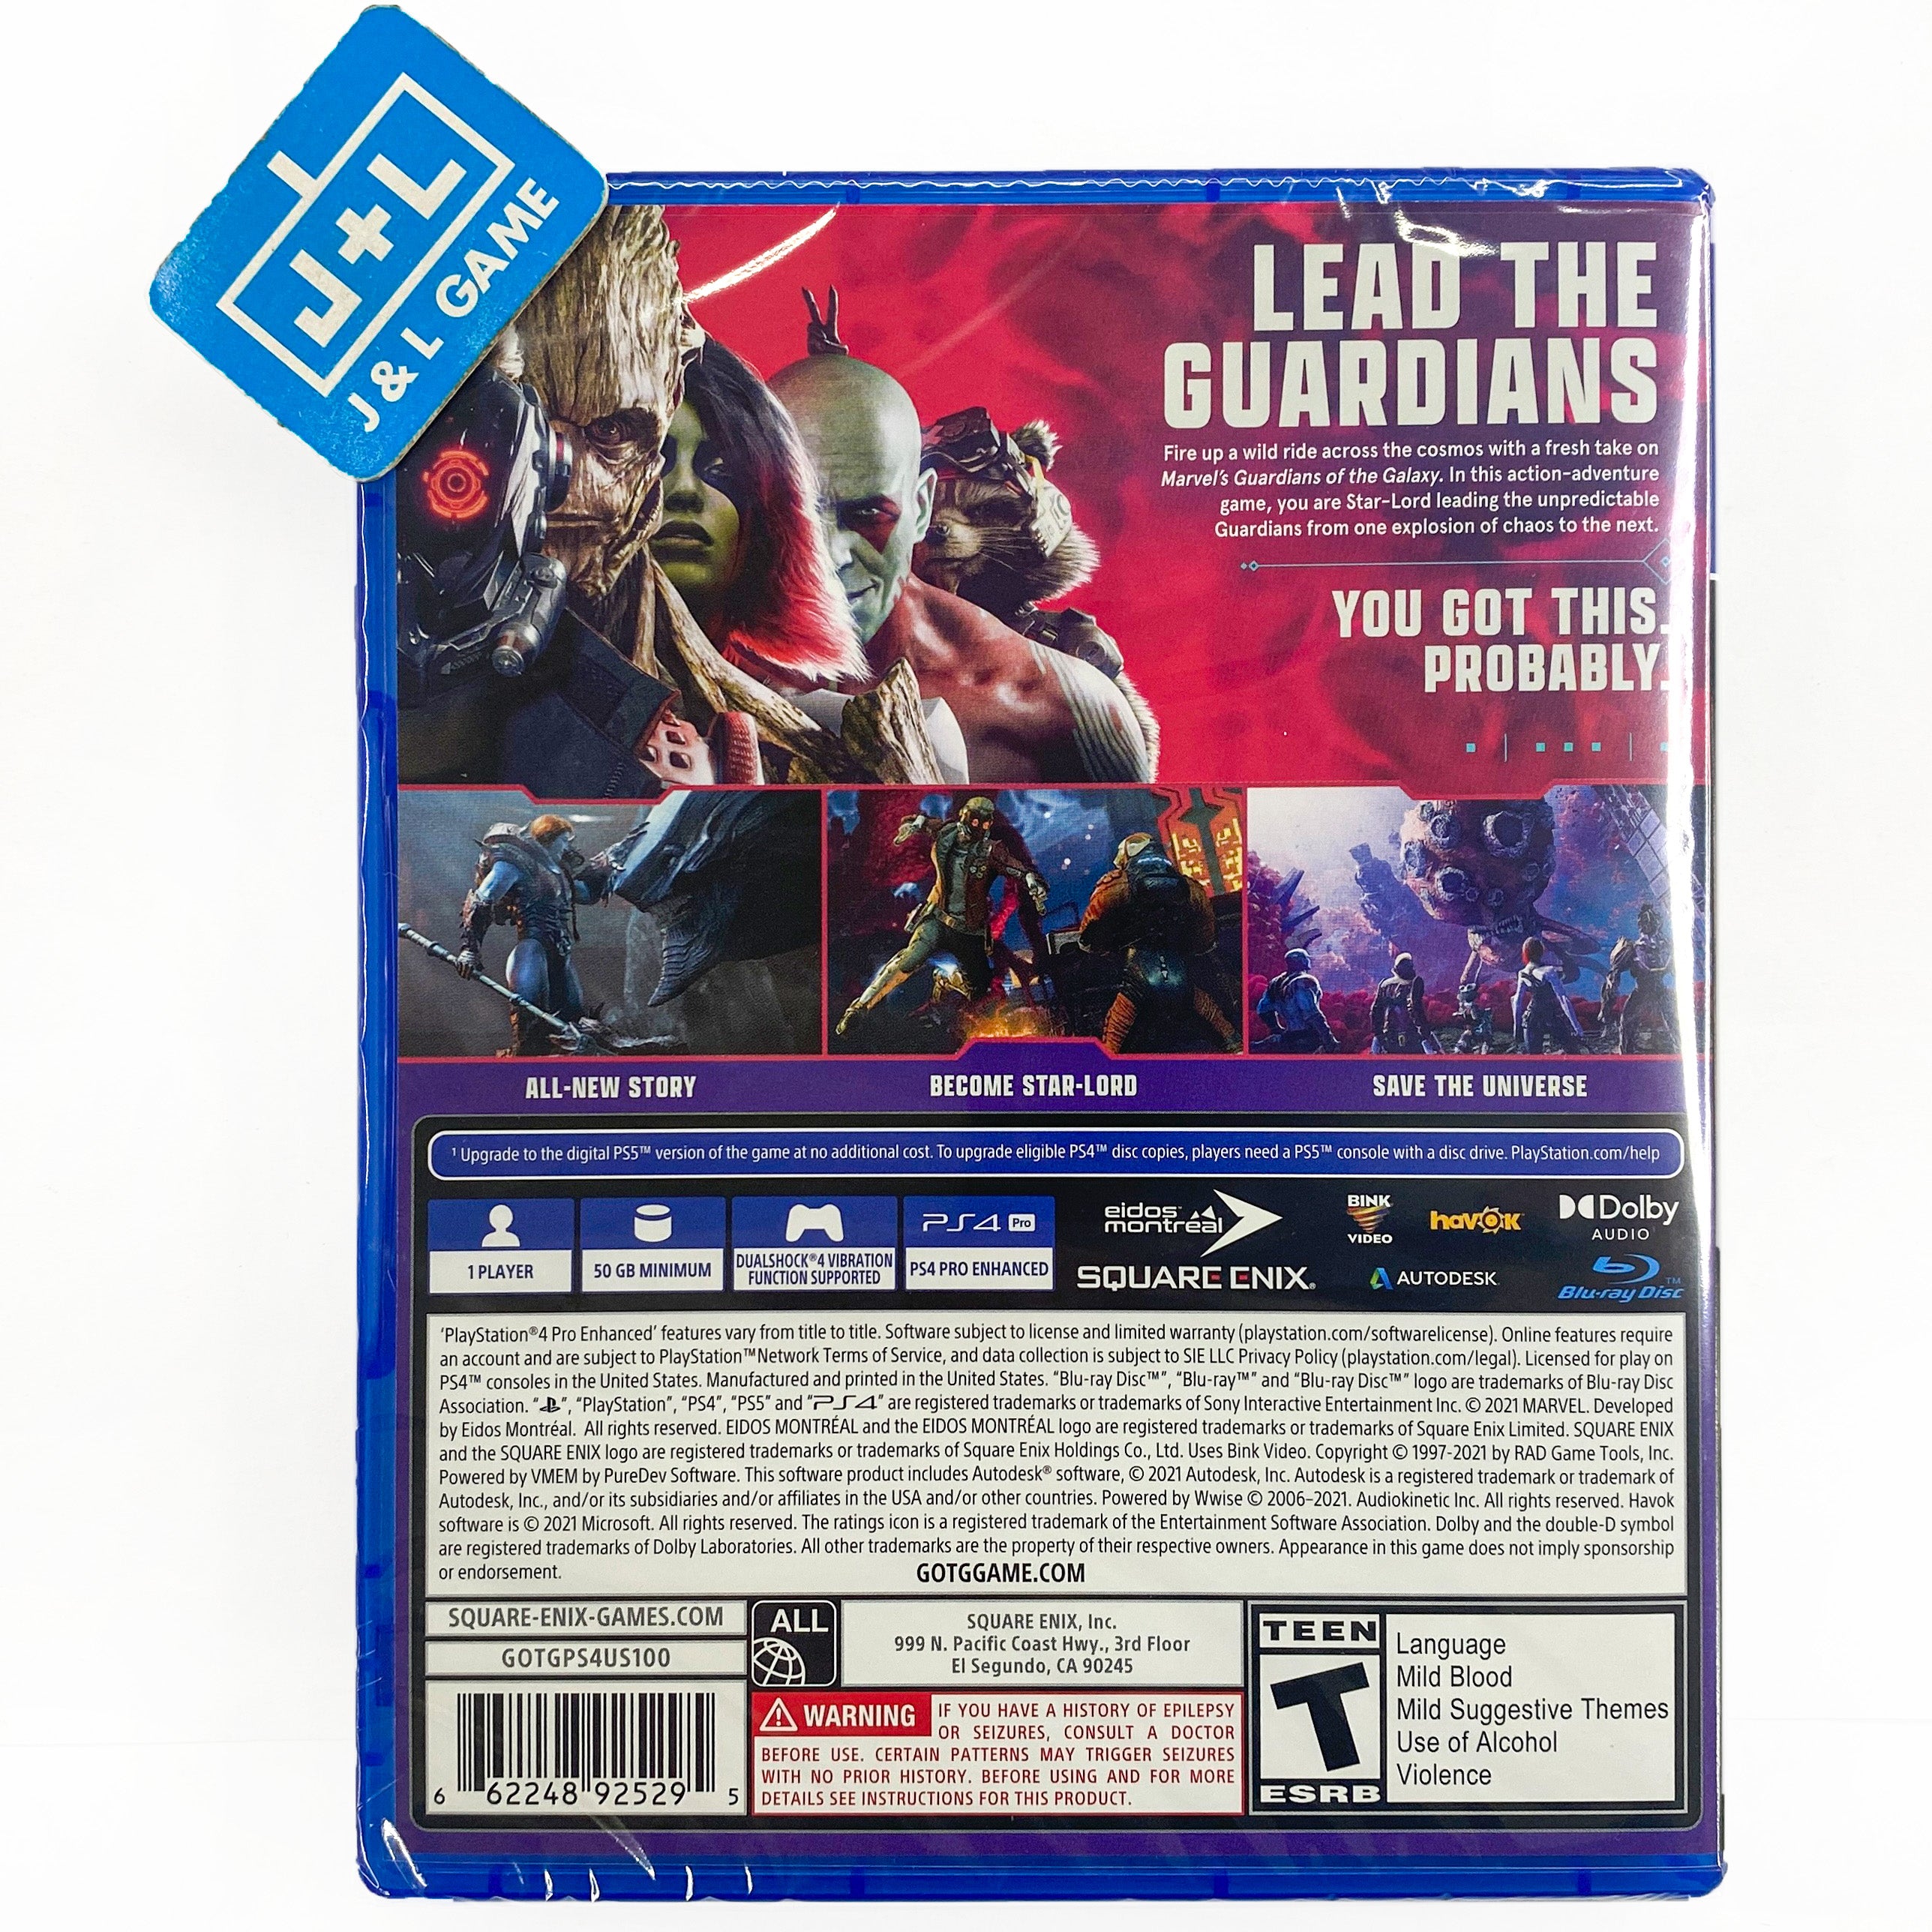 Marvel’s Guardians of the Galaxy - (PS4) PlayStation 4 Video Games Square Enix   